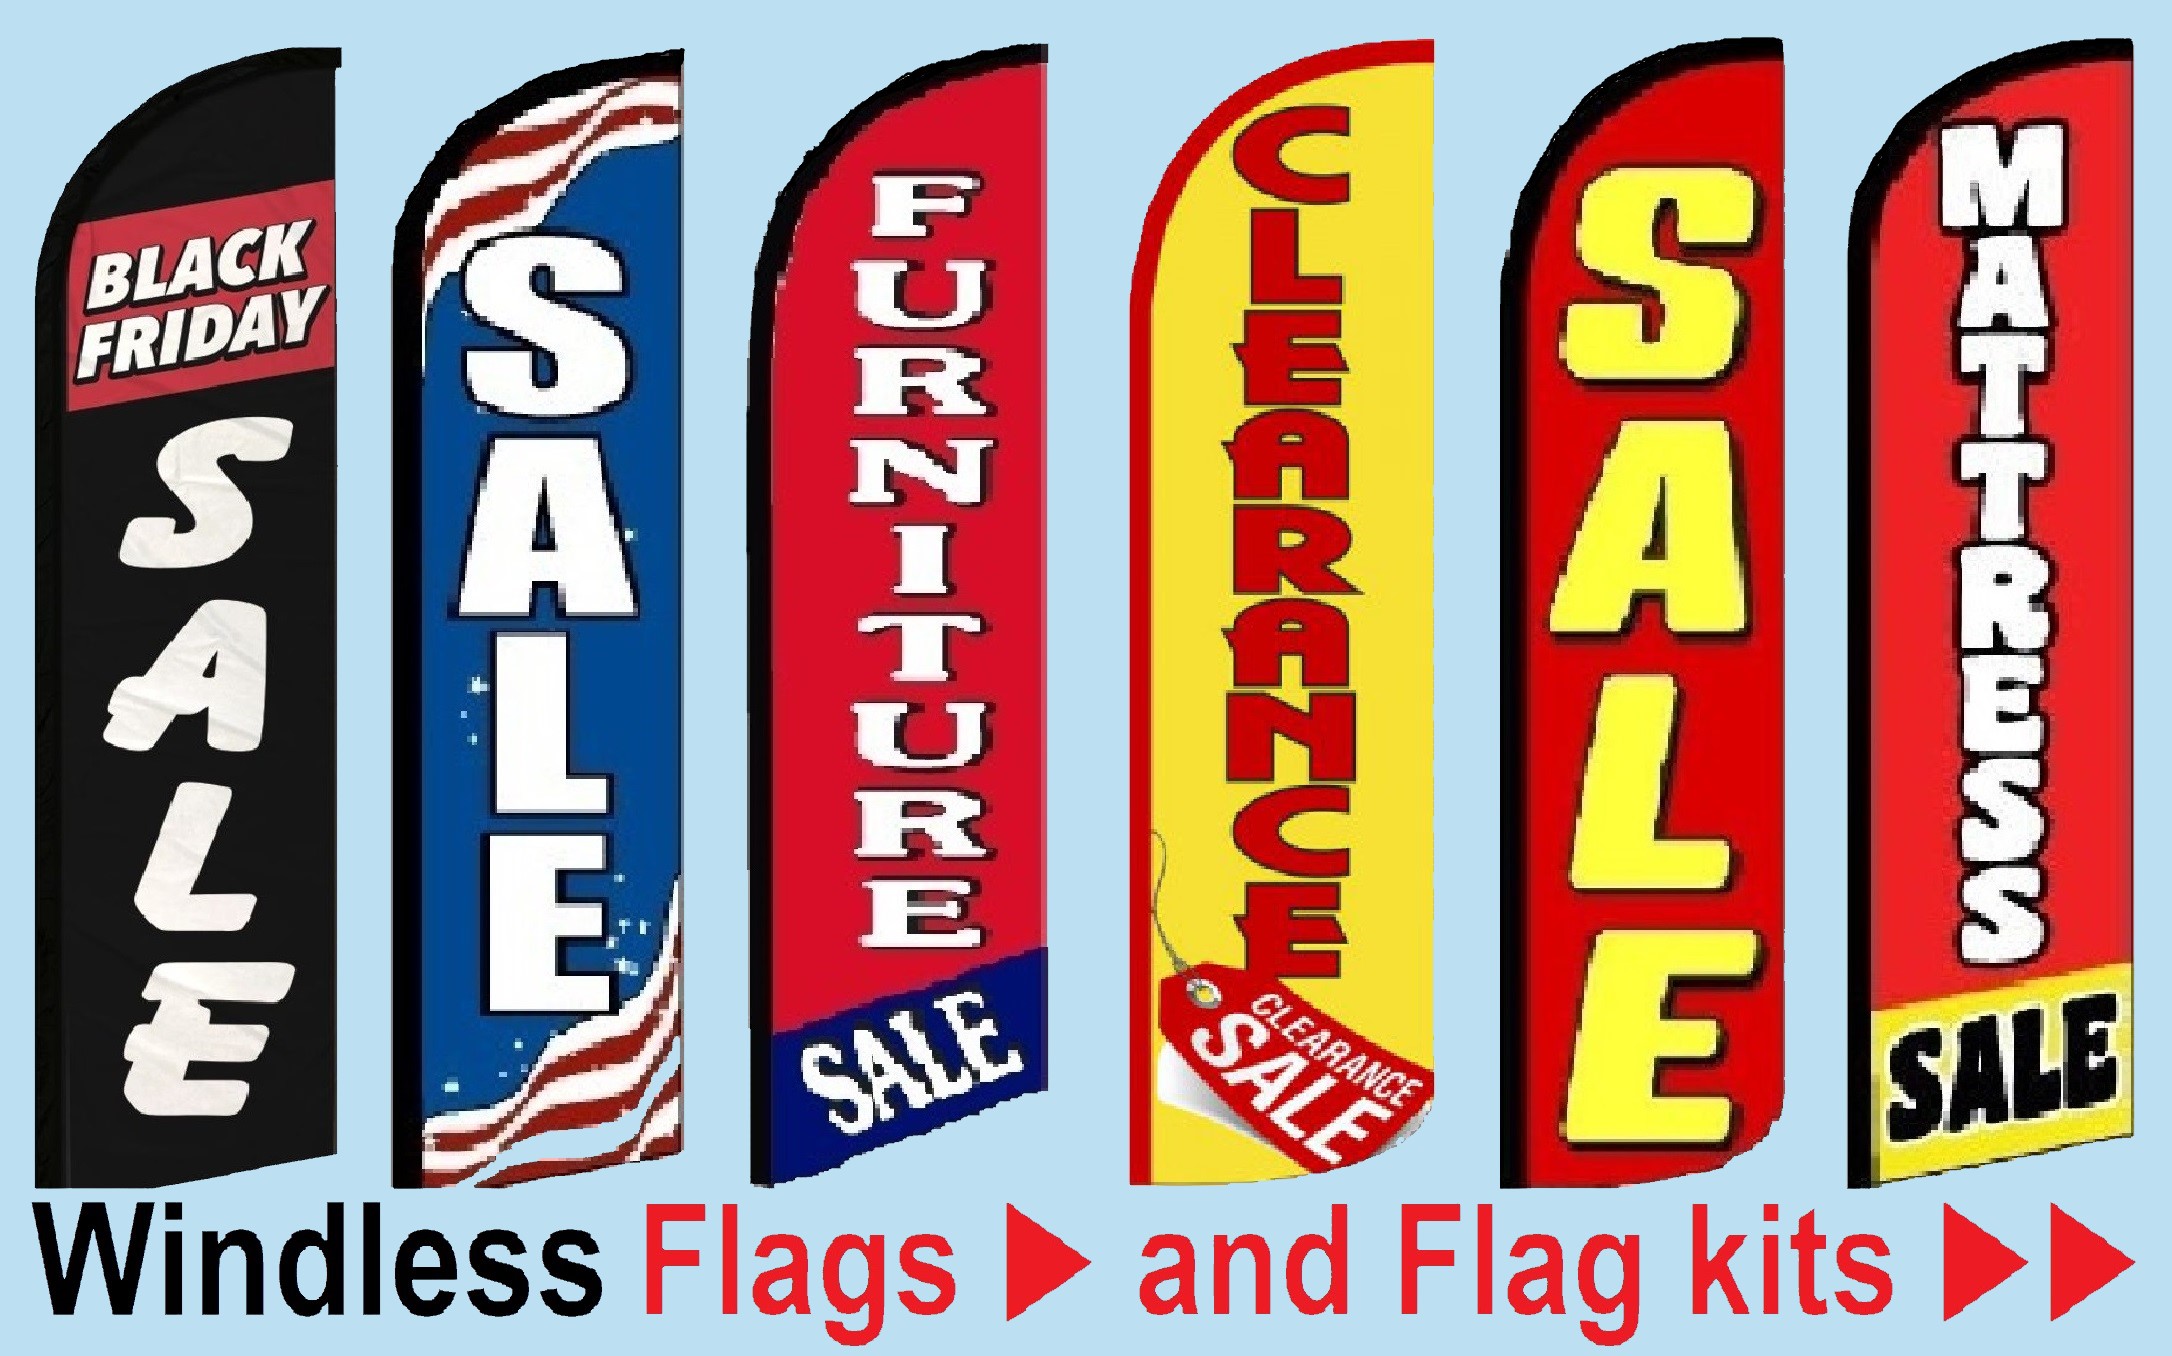 CLEARANCE-Sale – Welcome to